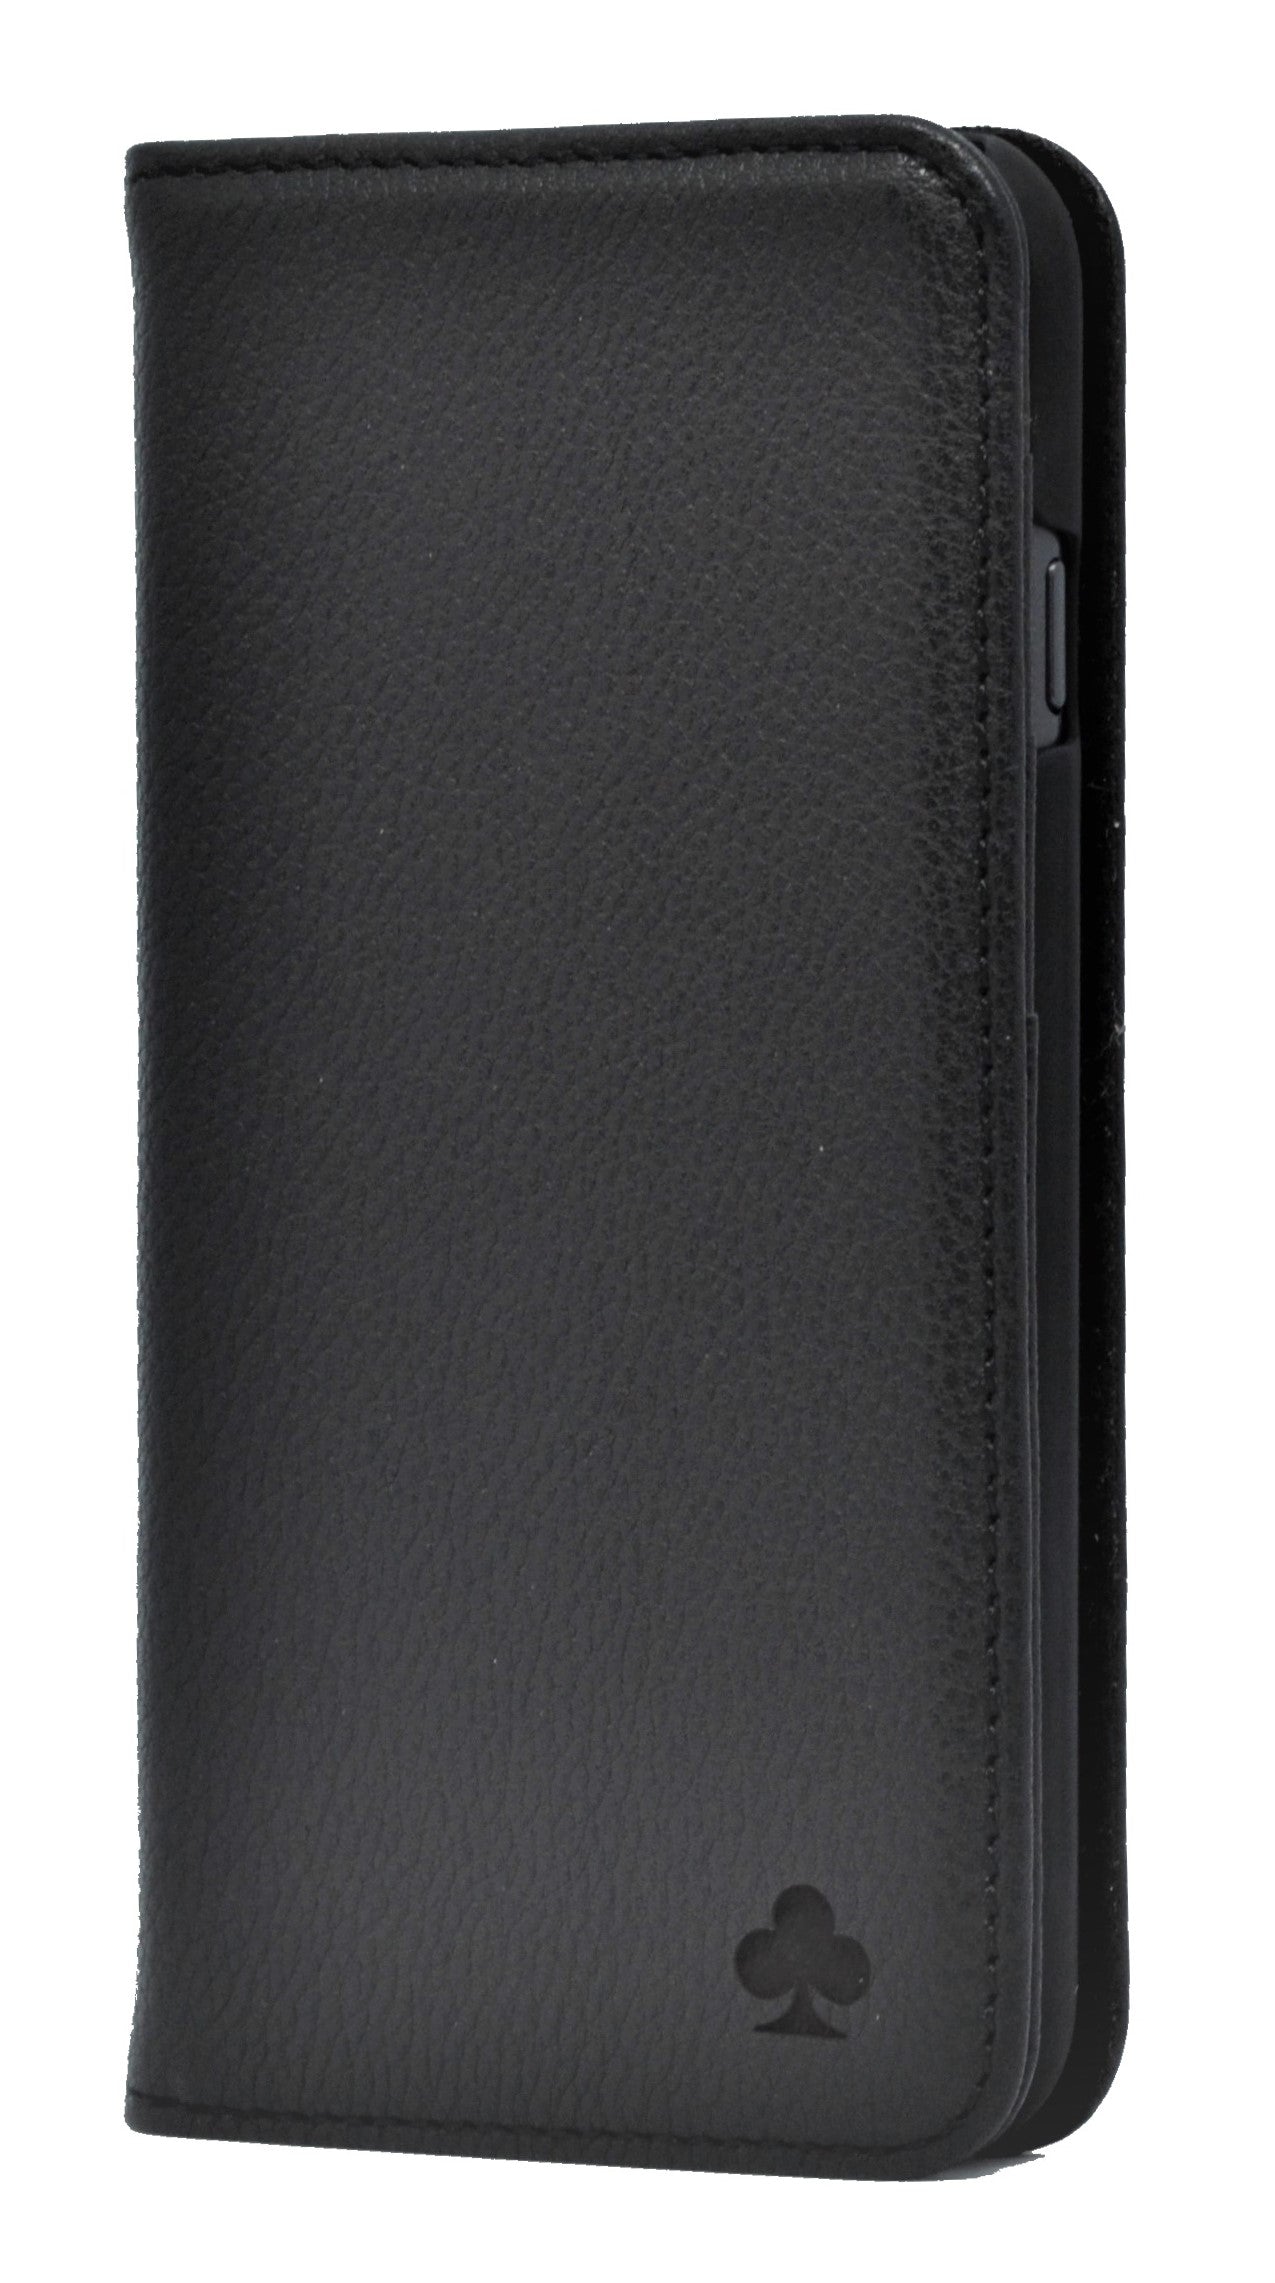 Samsung Galaxy S21 Ultra Leather Case. Premium Slim Genuine Leather Stand Case/Cover/Wallet (Black)